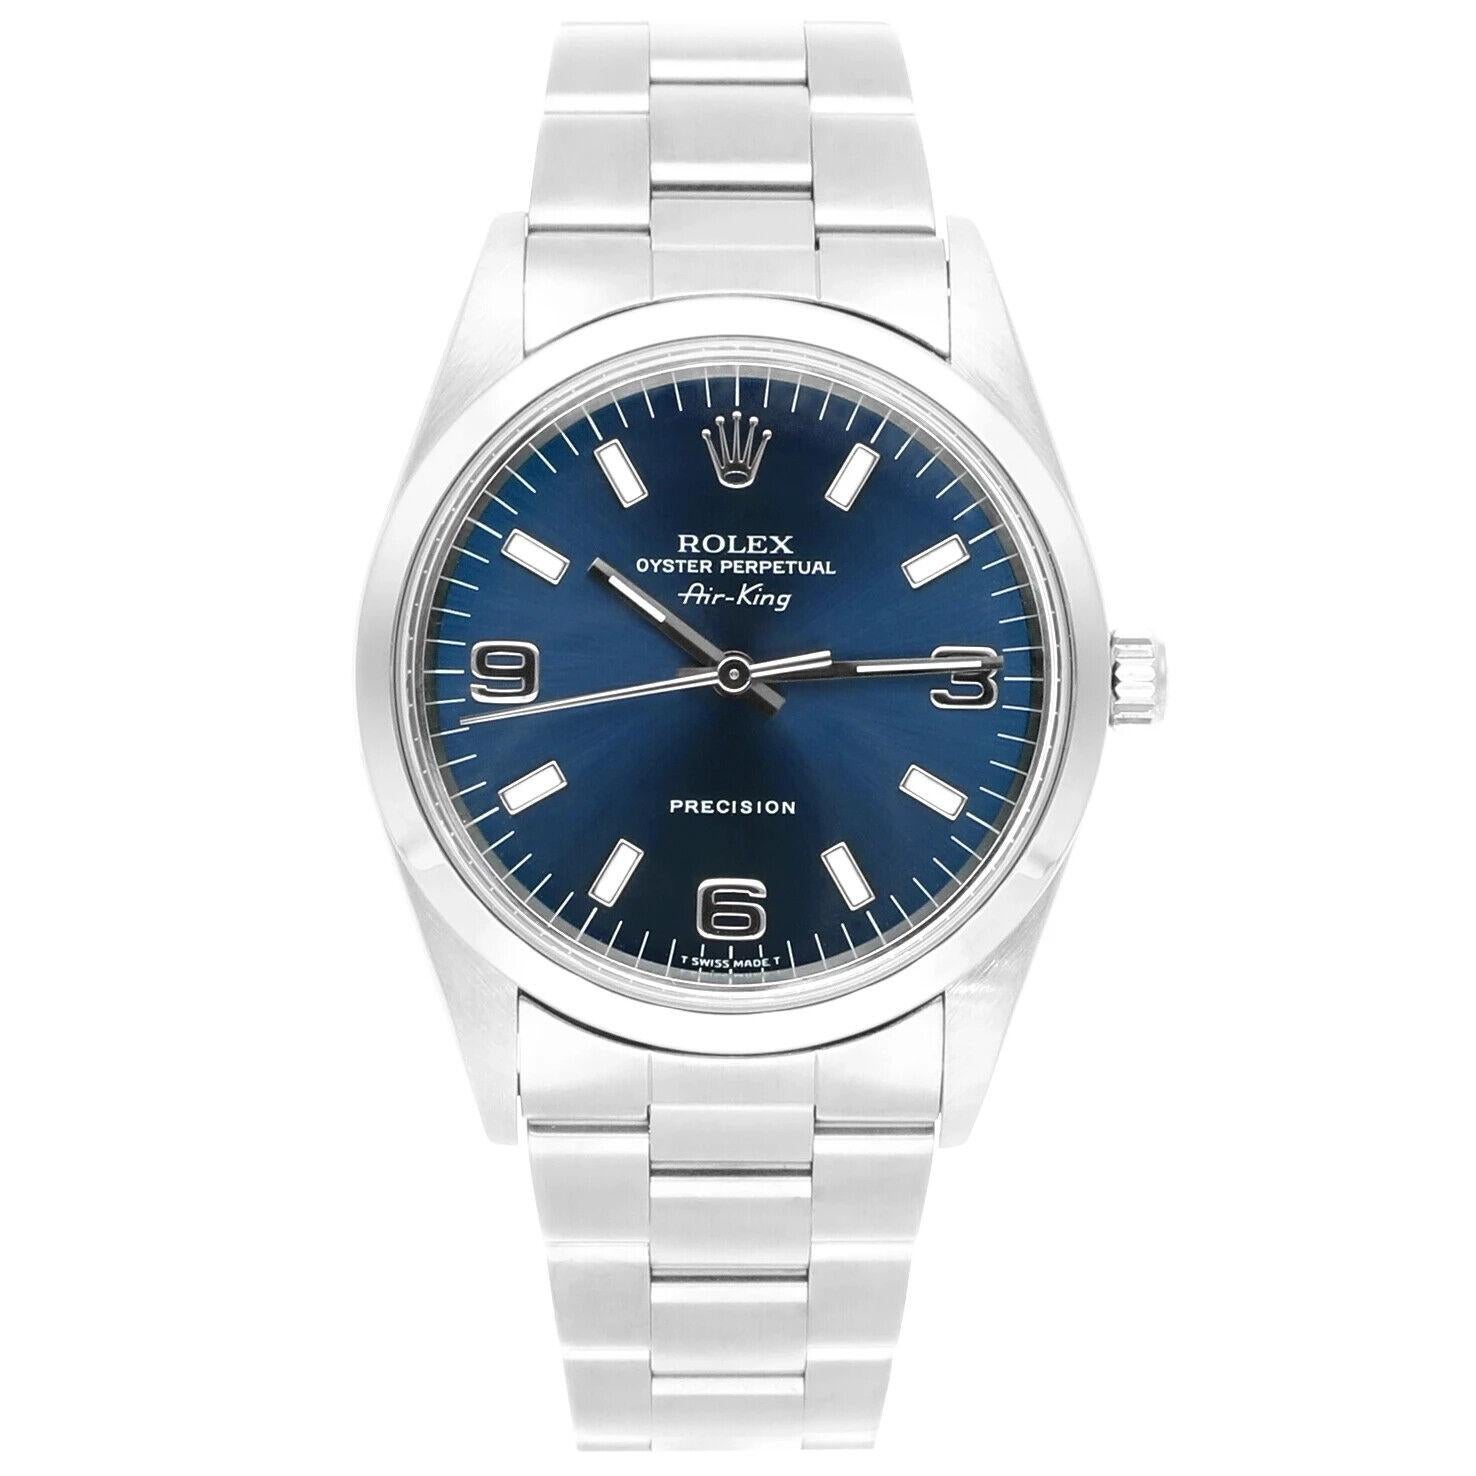 Rolex Air King 34mm Stainless Steel Watch Blue Dial Smooth Bezel Unisex Watch 14000, Circa 1998. This watch has been professionally polished, serviced and is in excellent overall condition. There are absolutely no visible scratches or blemishes.